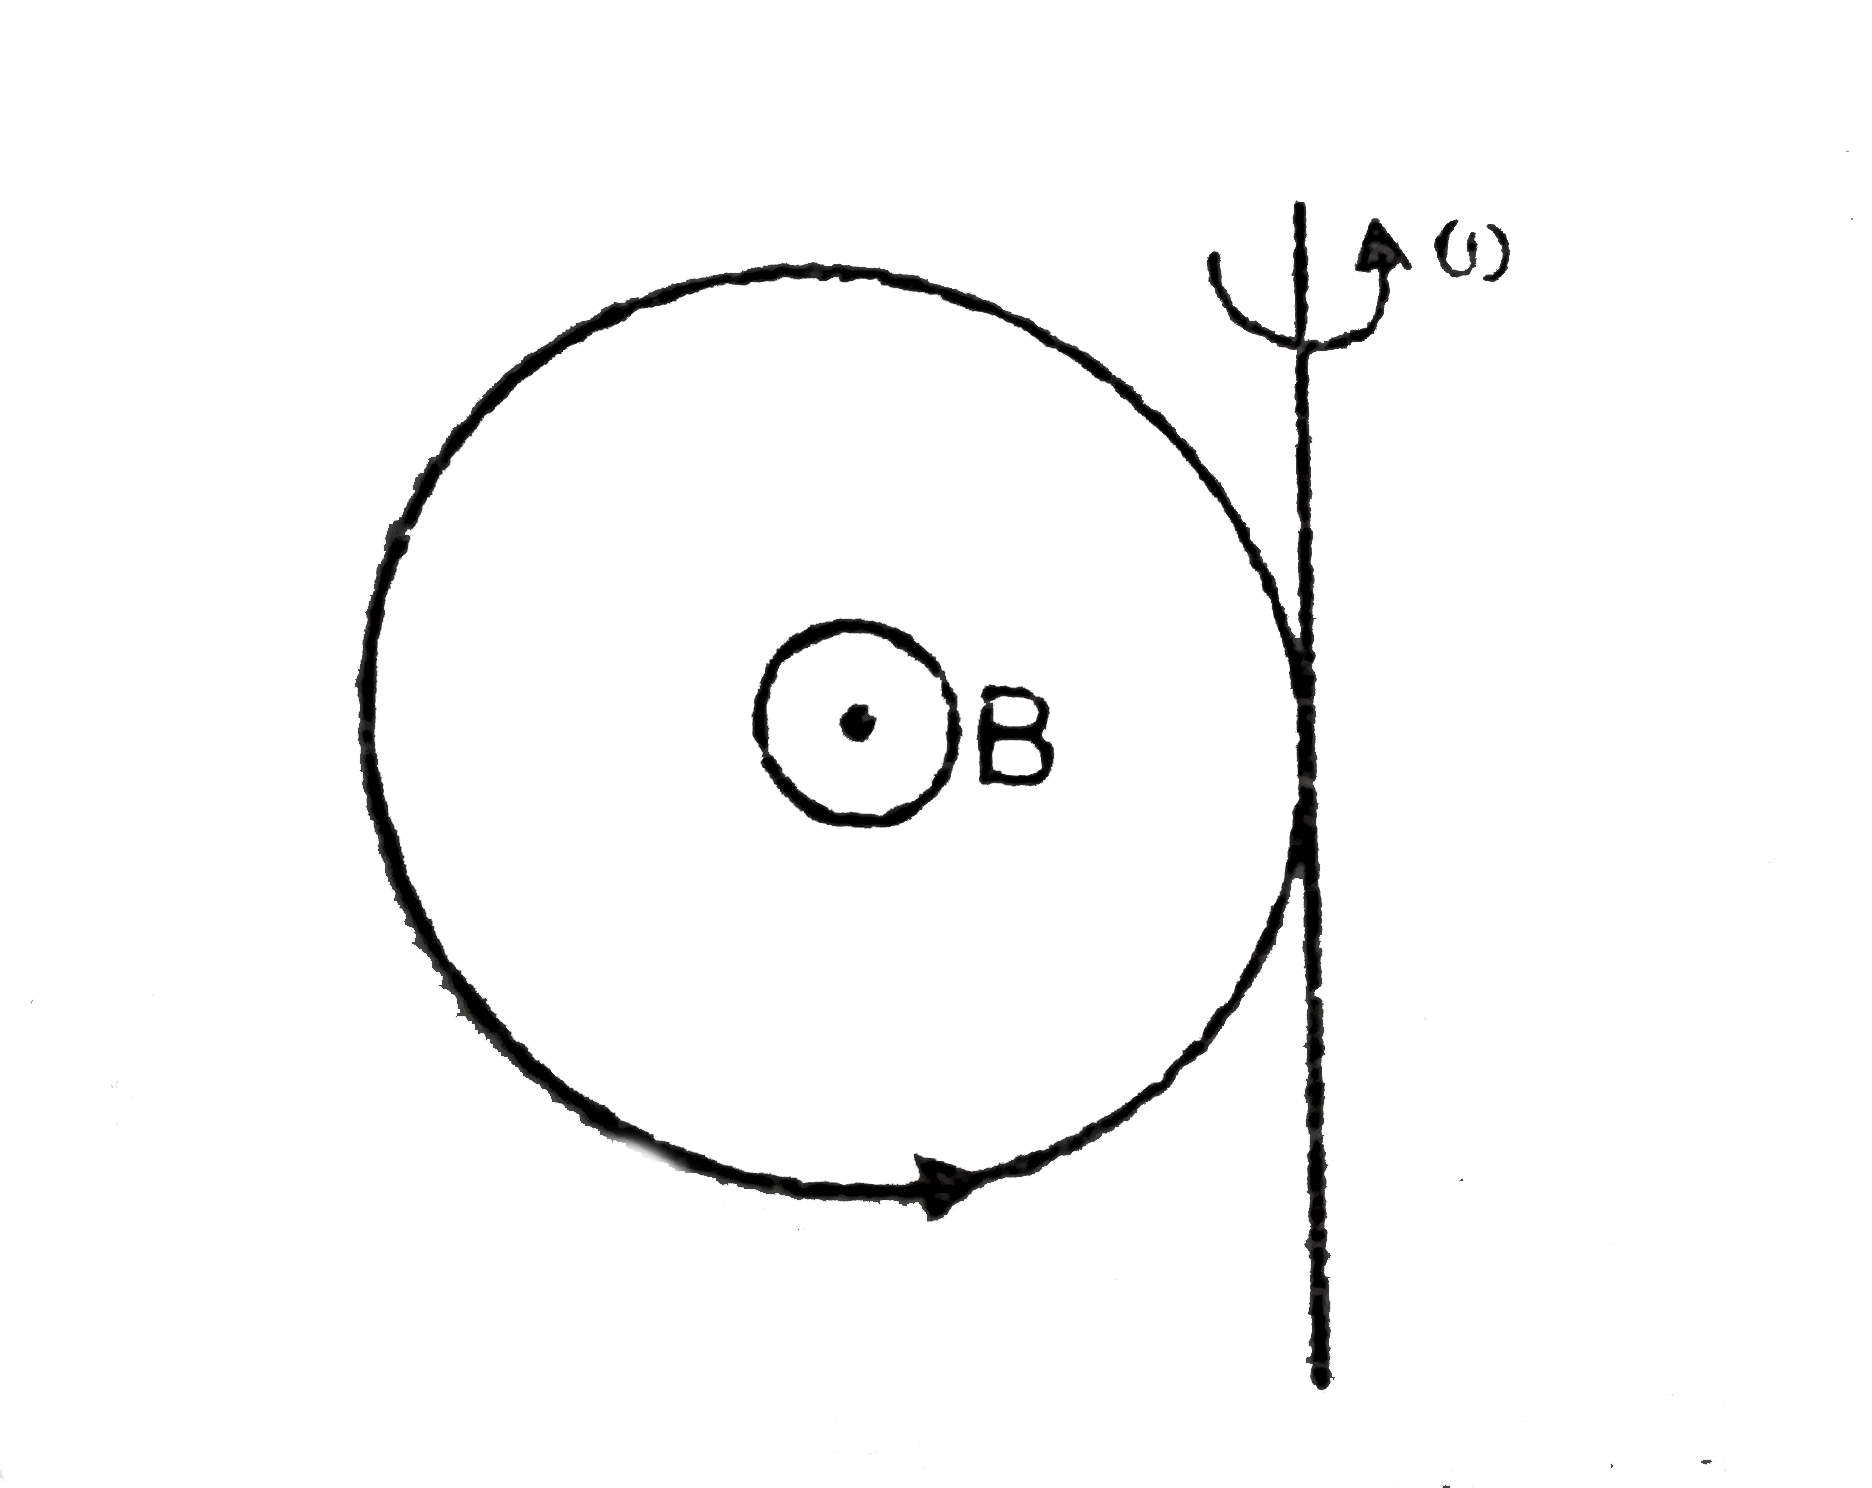 A current carrying ring, carrying a constant current (2)/(pi) Amp, radius 1m mass (2)/(3)kg having 10 windings is free to rotate about its tangential vertical axis. A uniform magnetic field of 1 tesla is applied perpendicular to its plane. How much minimum angular velocity (in rad/sec) should be given to the ring in the direction shown, so that it can rotate 270^(@) in that direction. Write your answer in nearest single digit in rad/sec